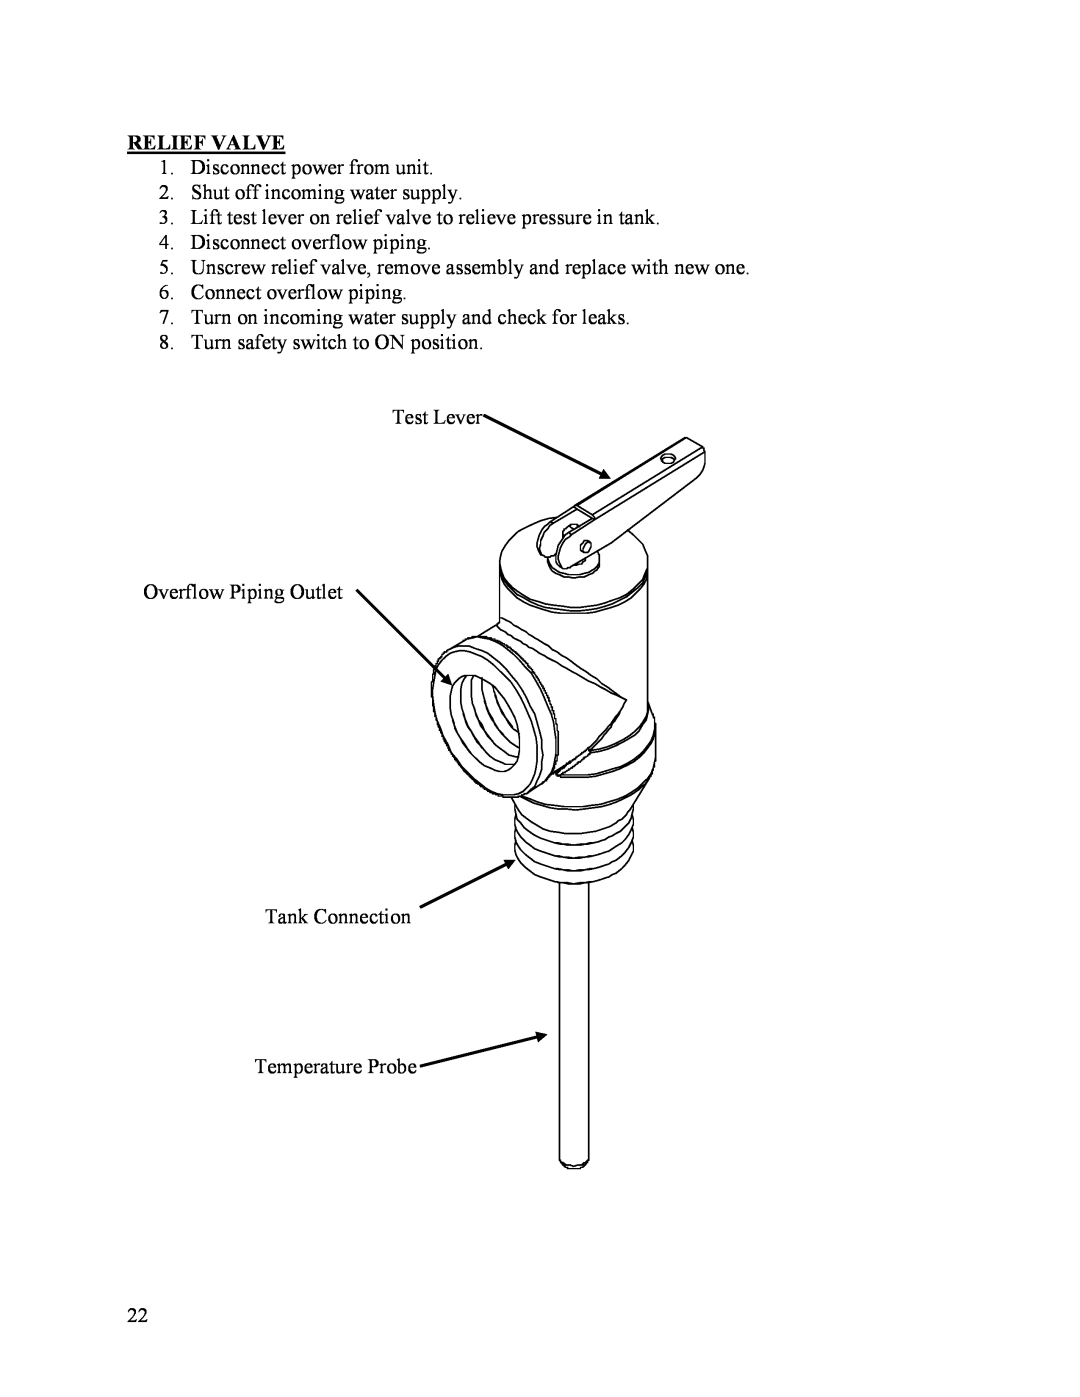 Hubbell Electric Heater Company ME manual Relief Valve 